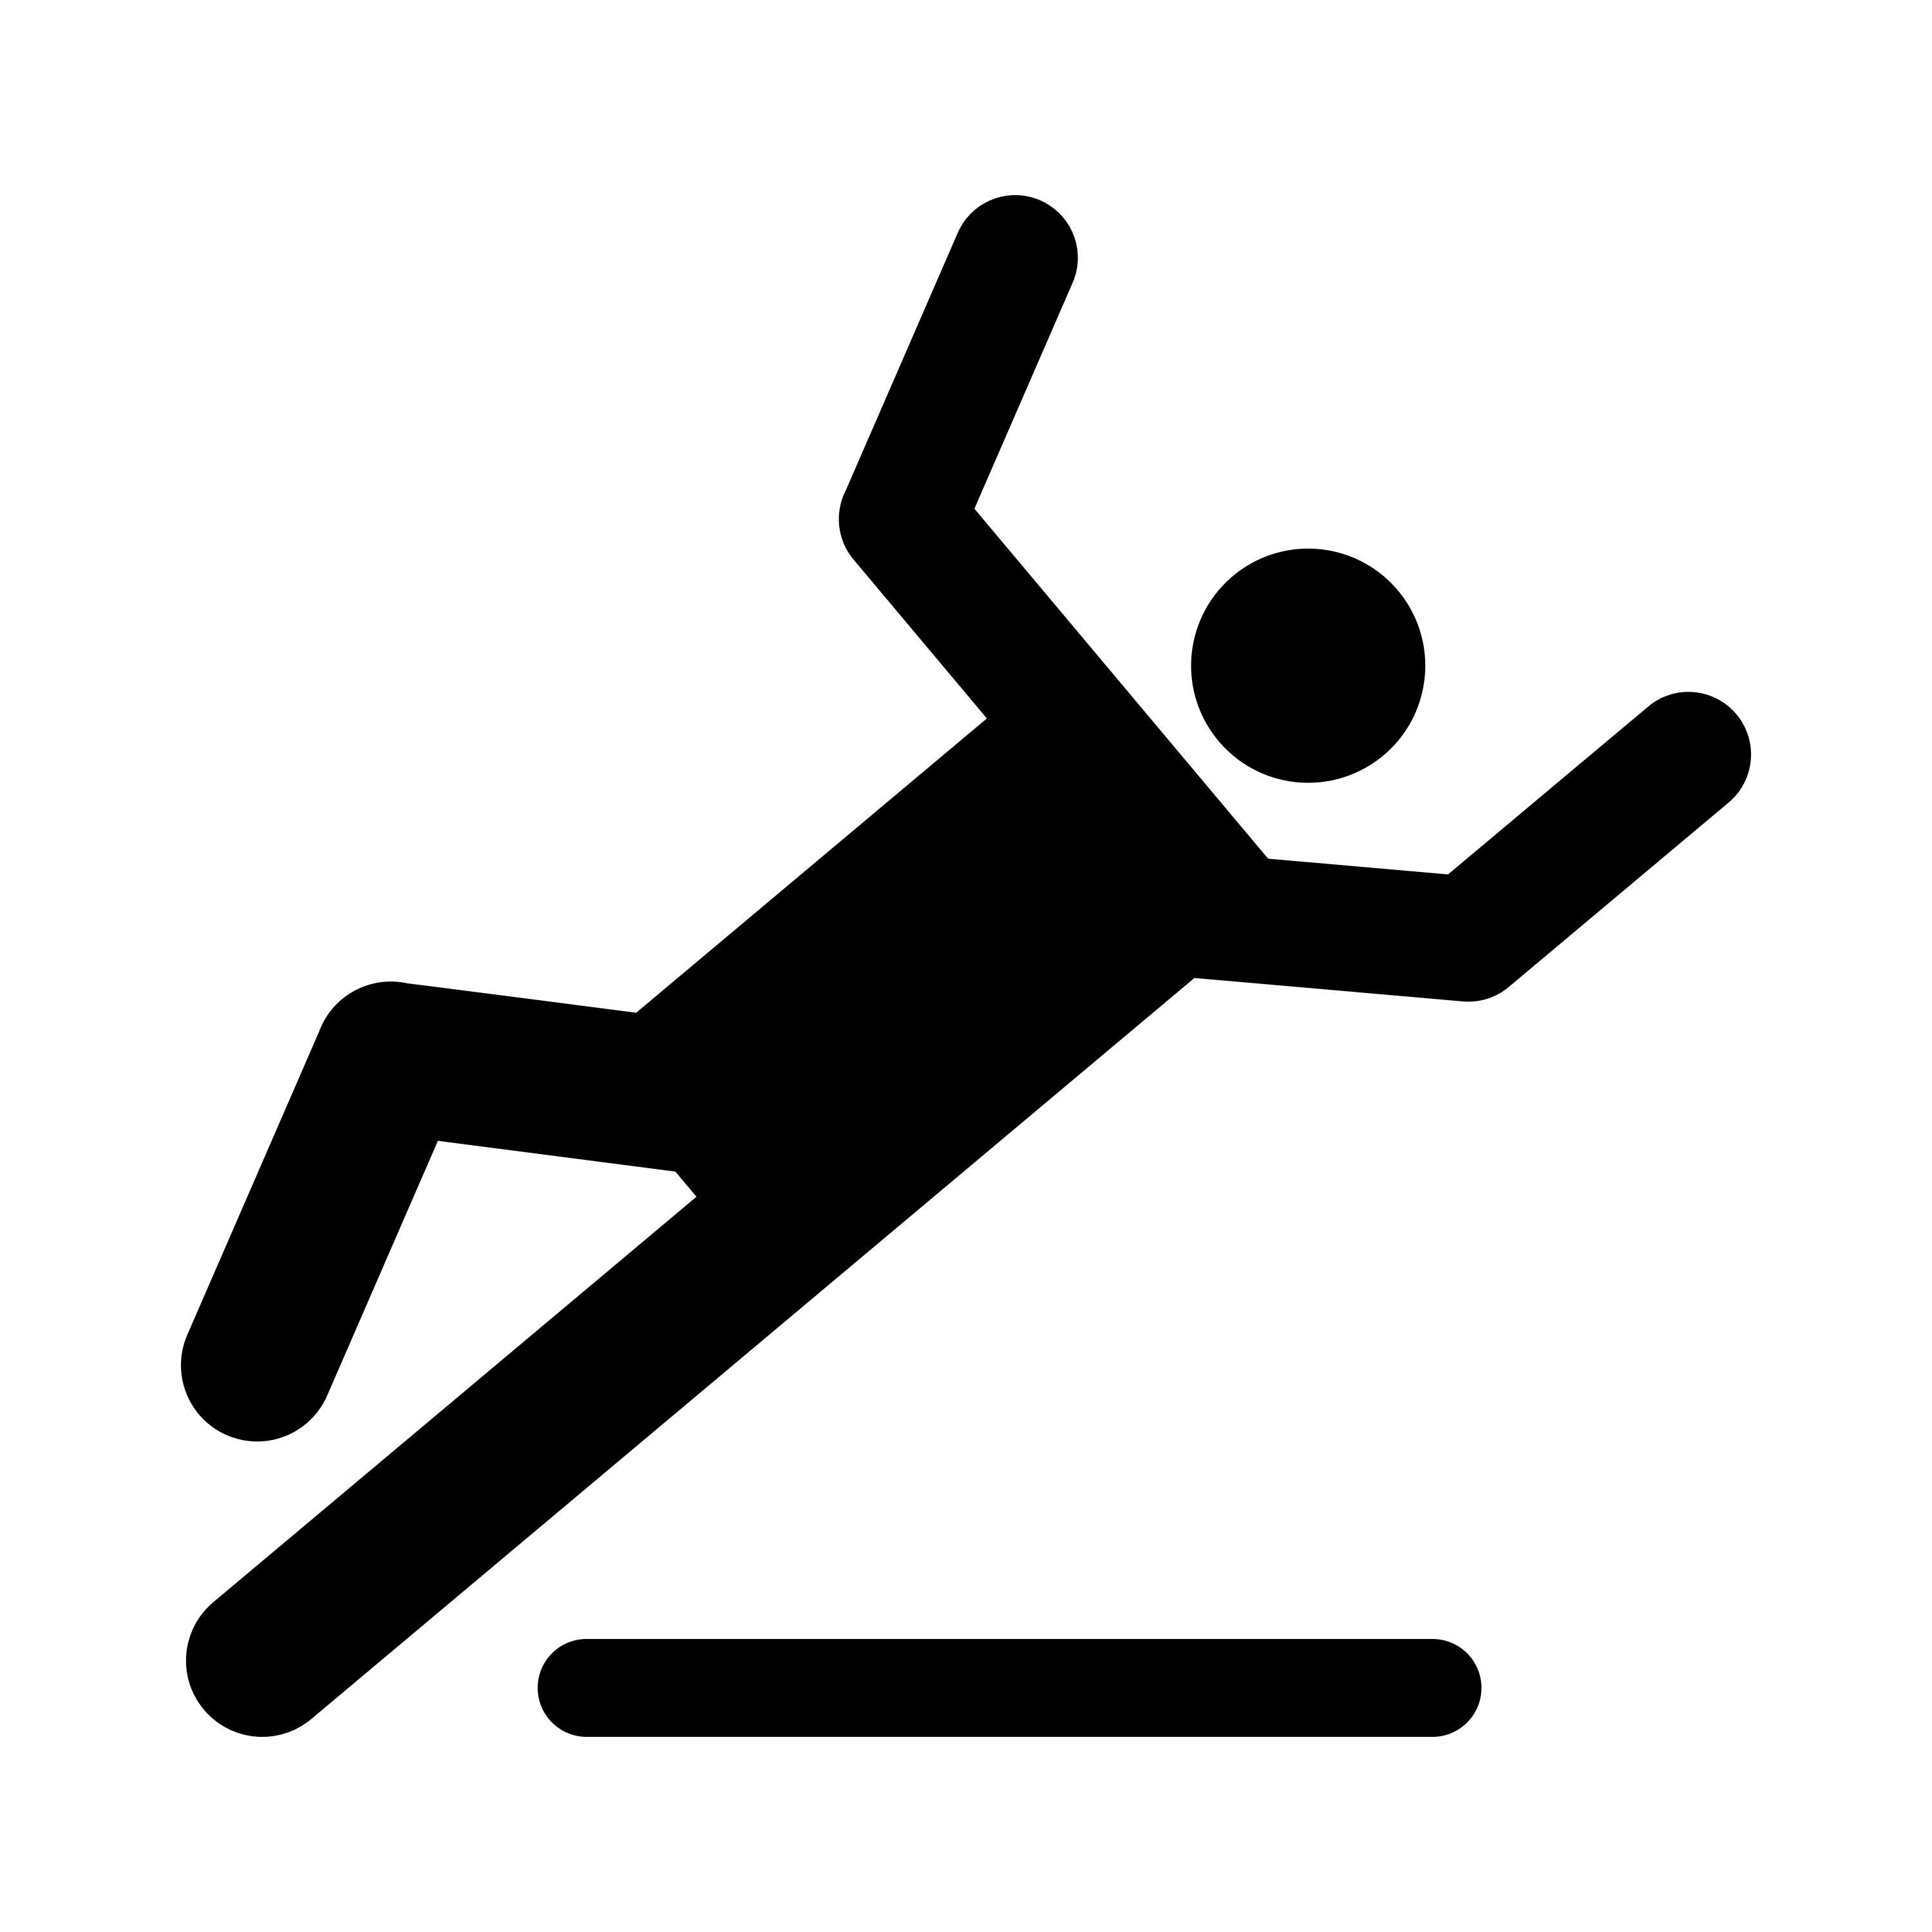 Slip-and-fall Illinois | Injury attorney Chicago